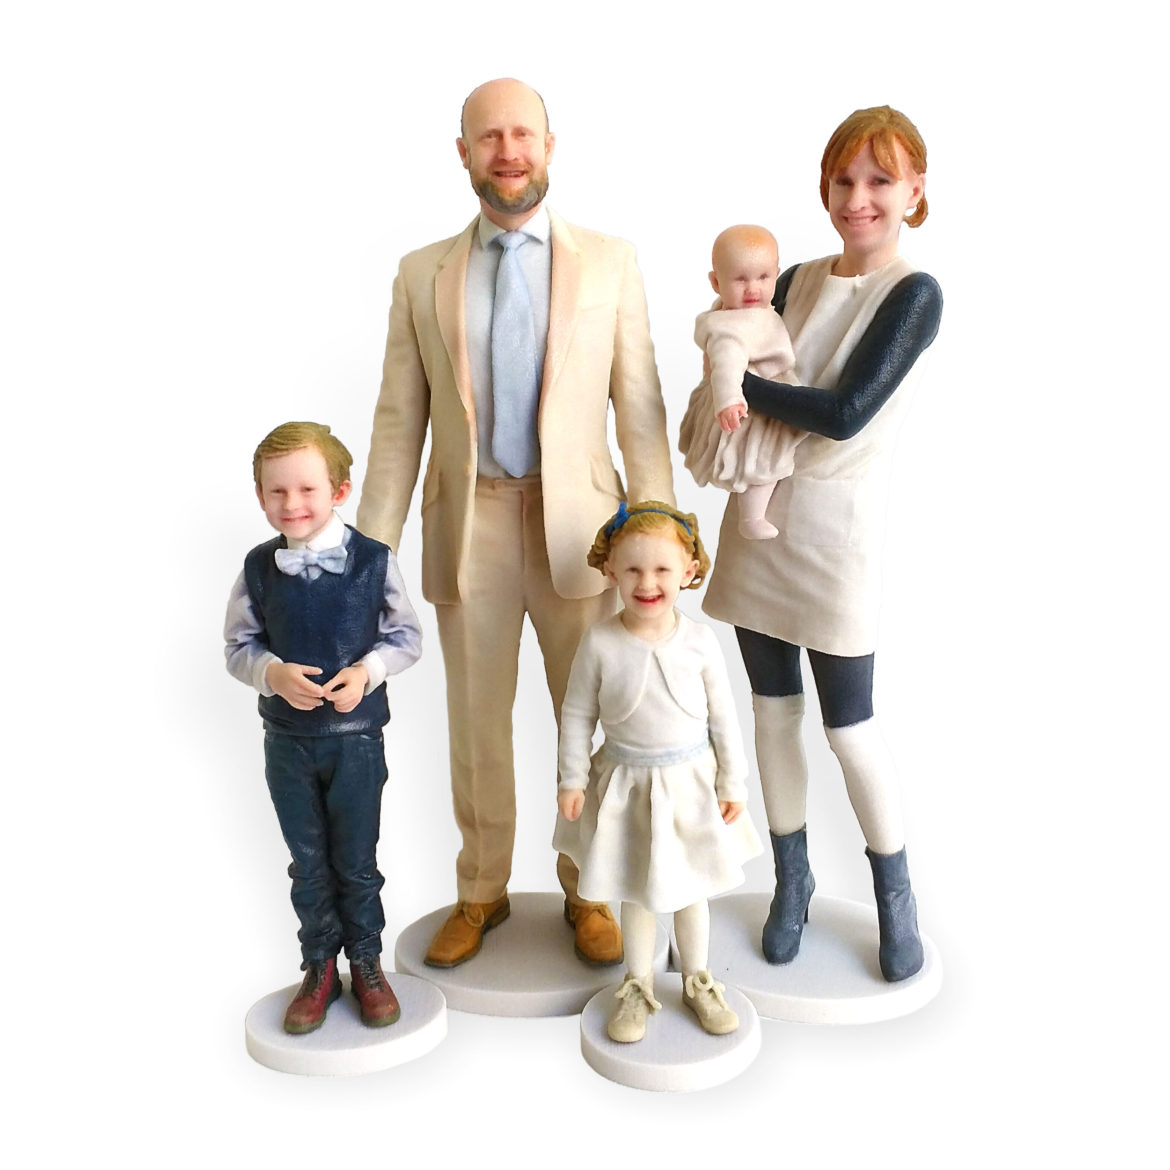 my3Dtwin - 3D Photography of a family of five